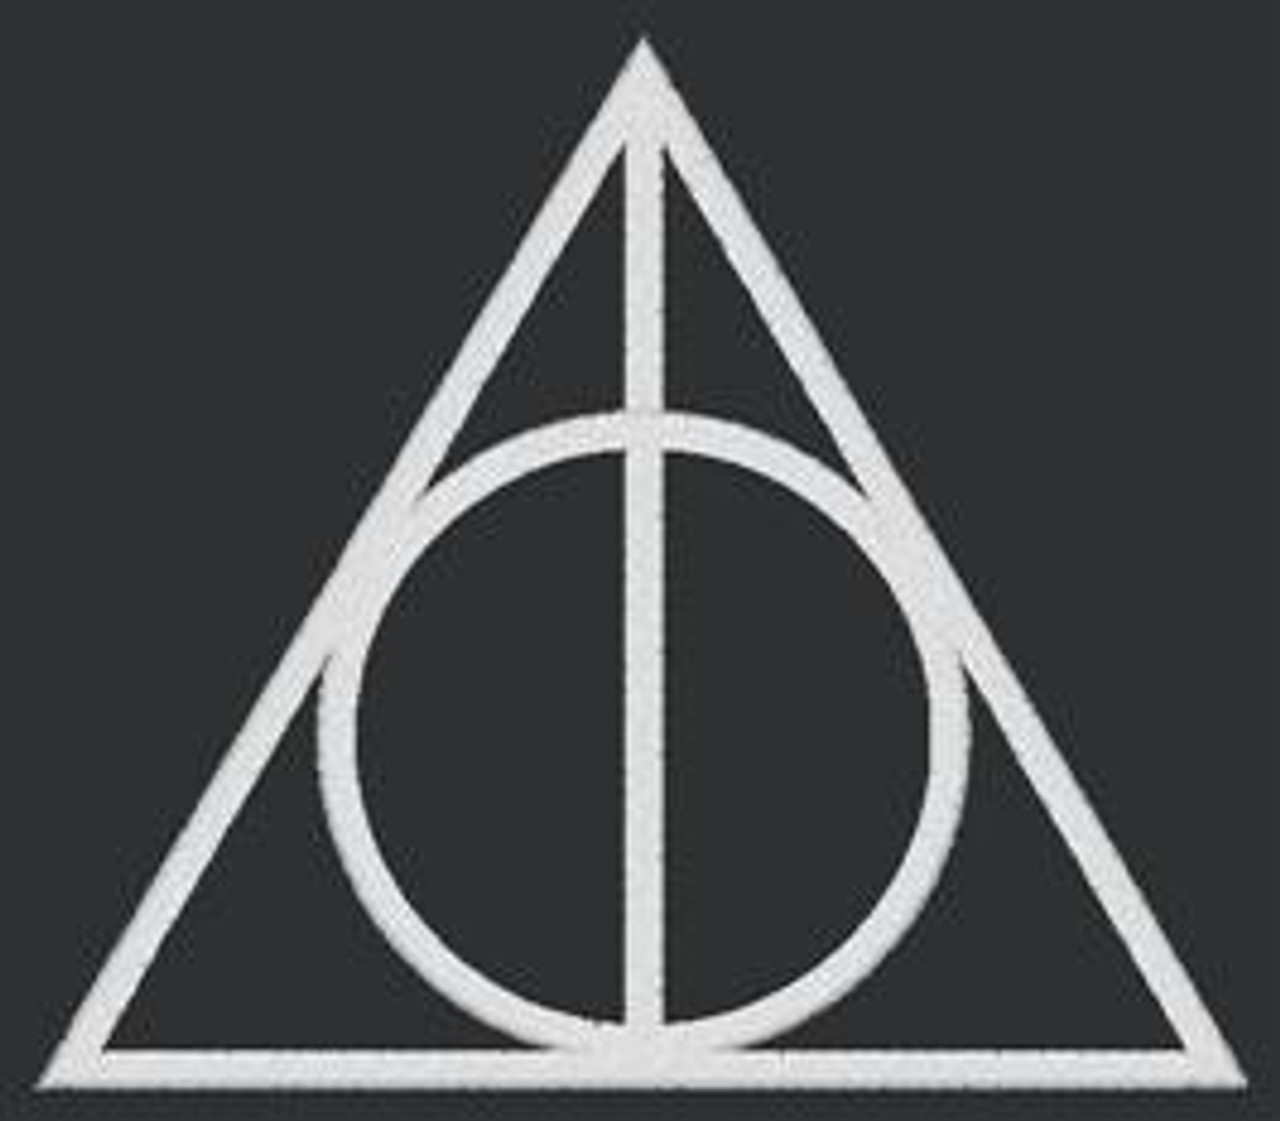 Dice Bag Deathly Hallows Harry Potter 